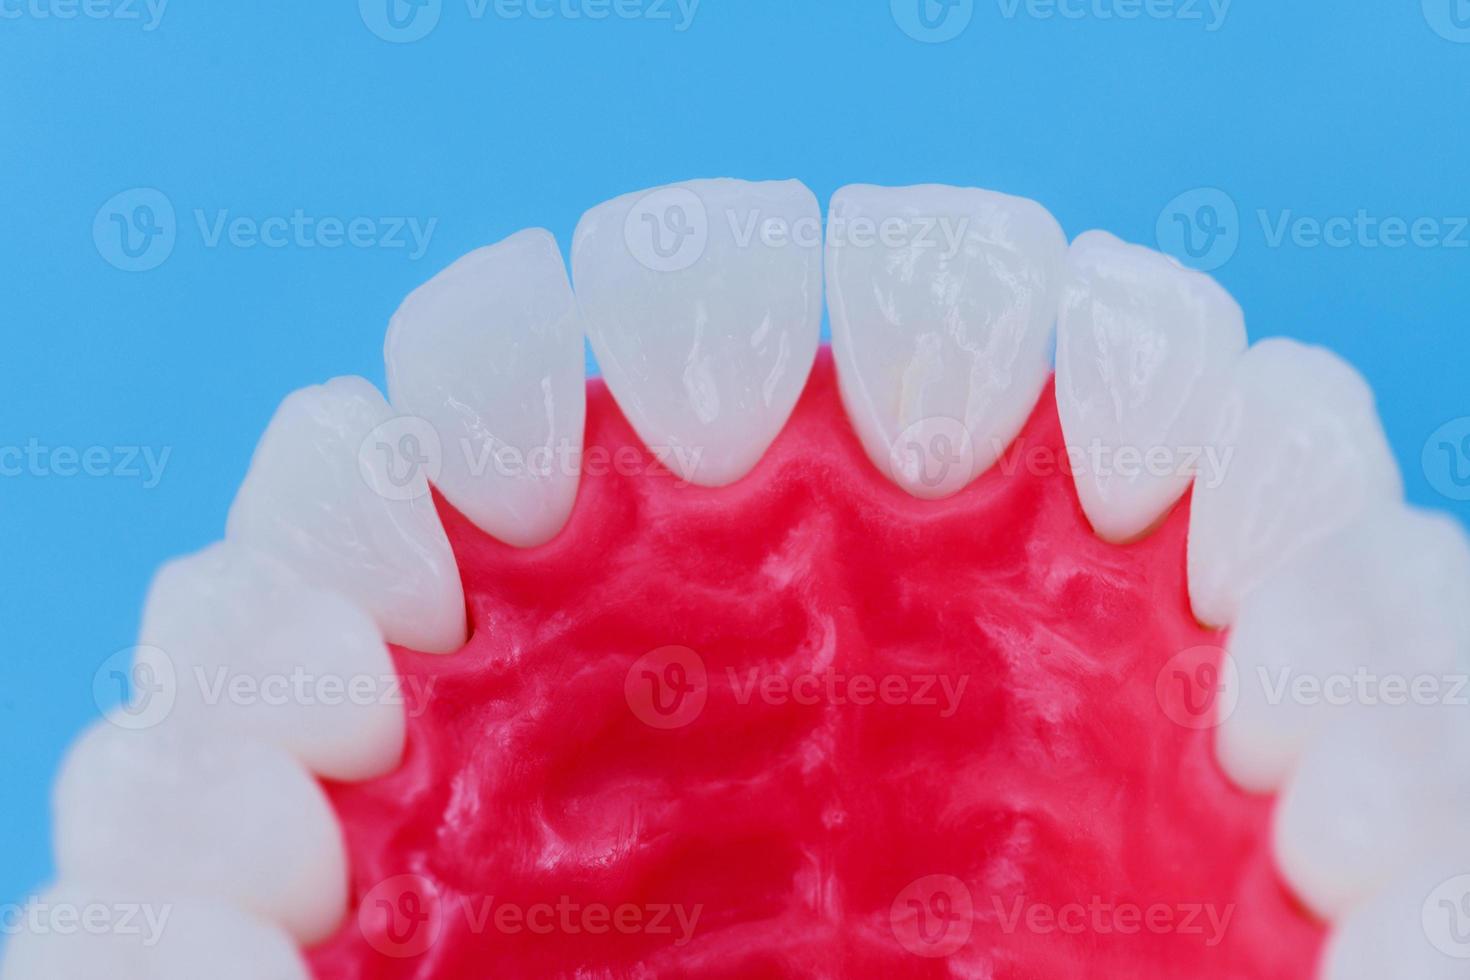 Upper human jaw with teeth and gums anatomy model photo